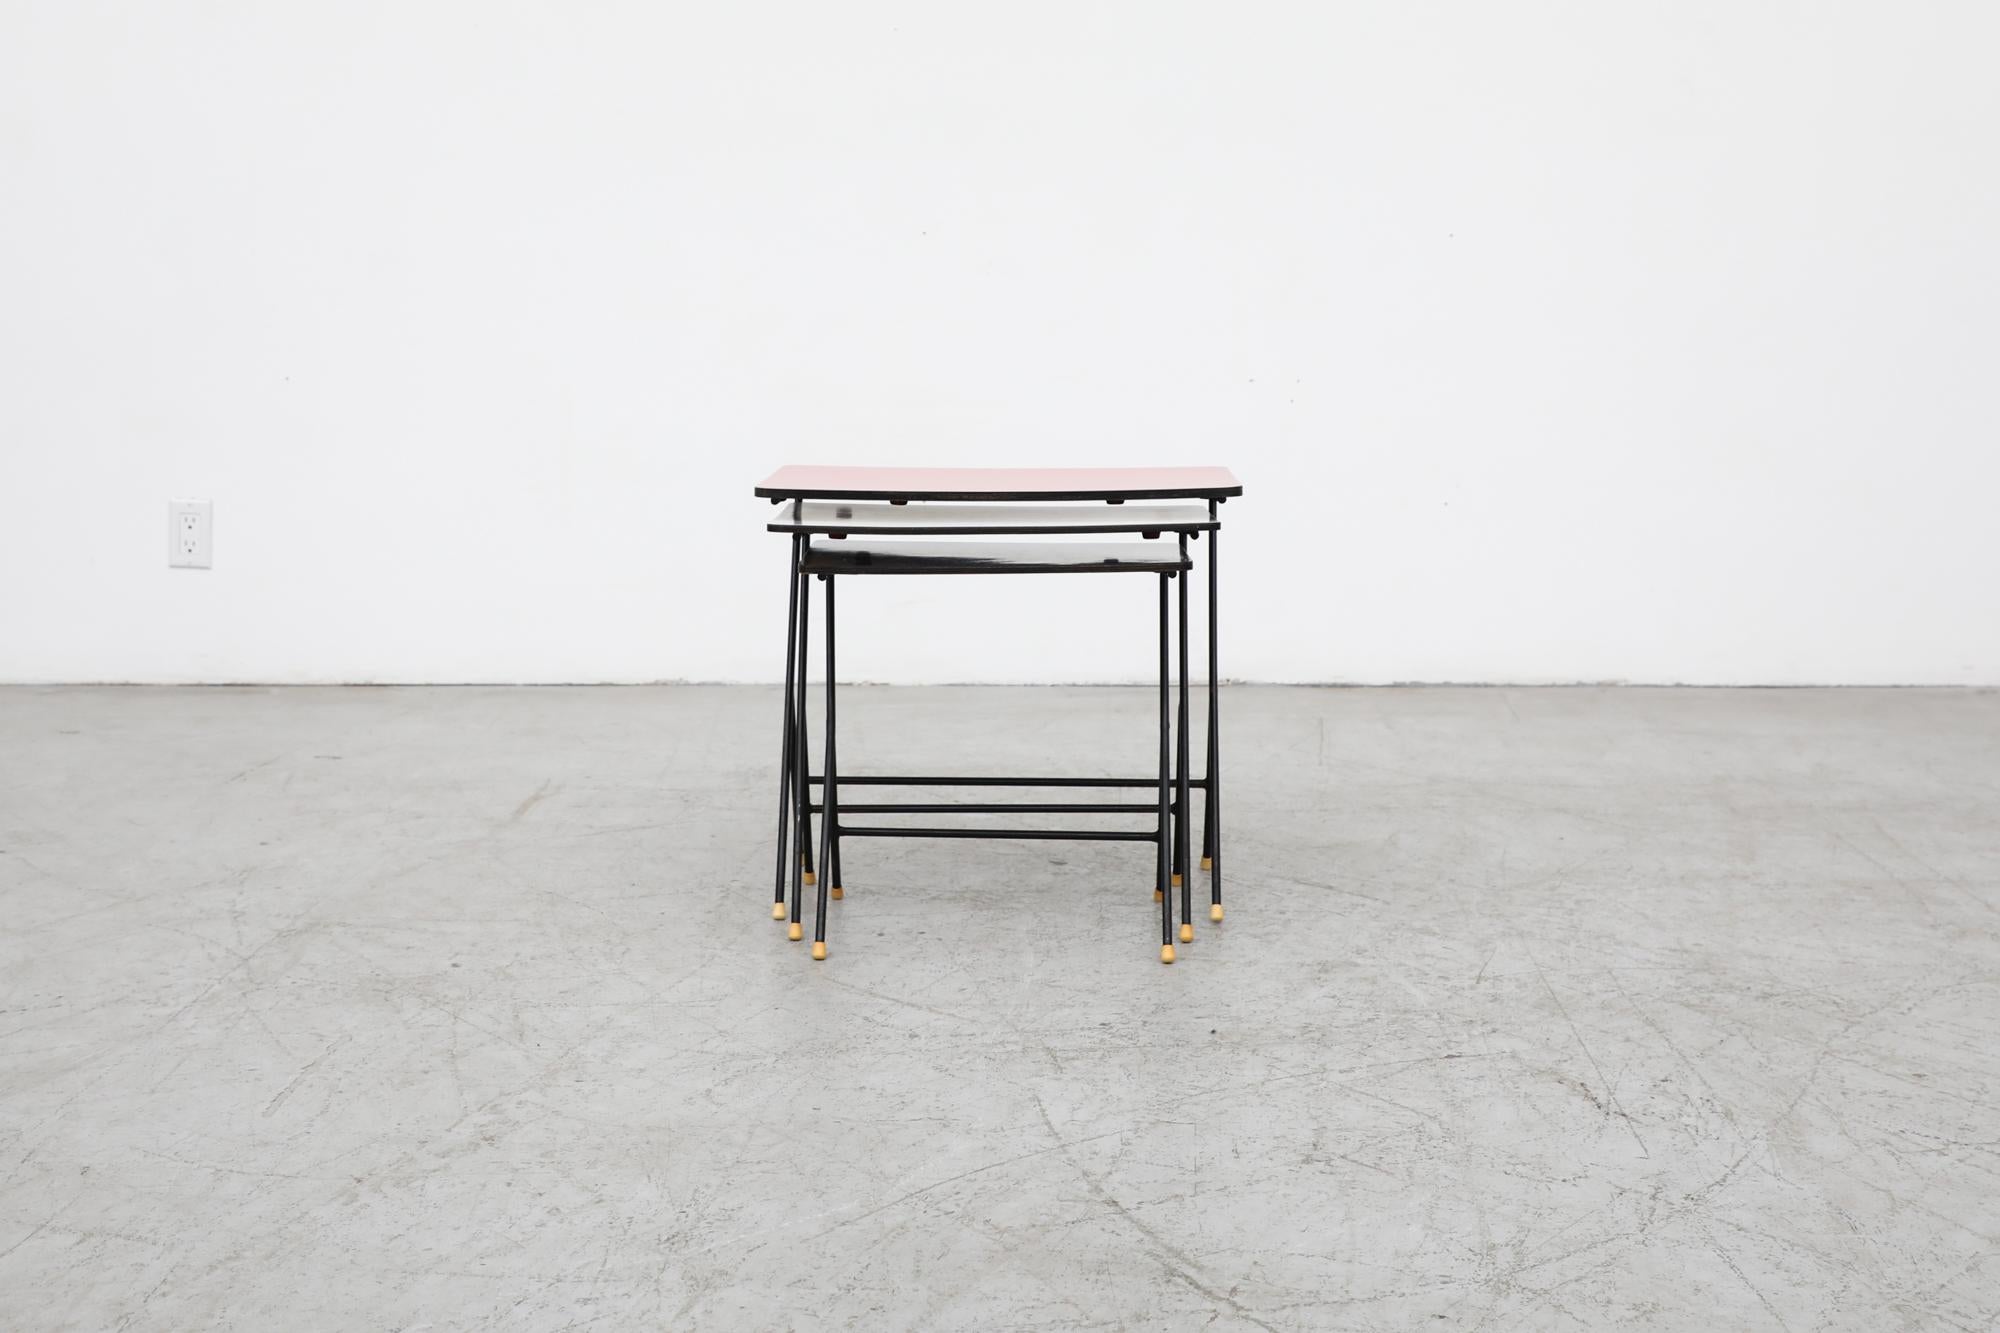 Rare 1950s Pilastro nesting tables with black enameled frames. Table tops are red, bone and black. In original condition with visible wear including enamel loss and minor bowing of the tops. Wear is consistent with their age and use.